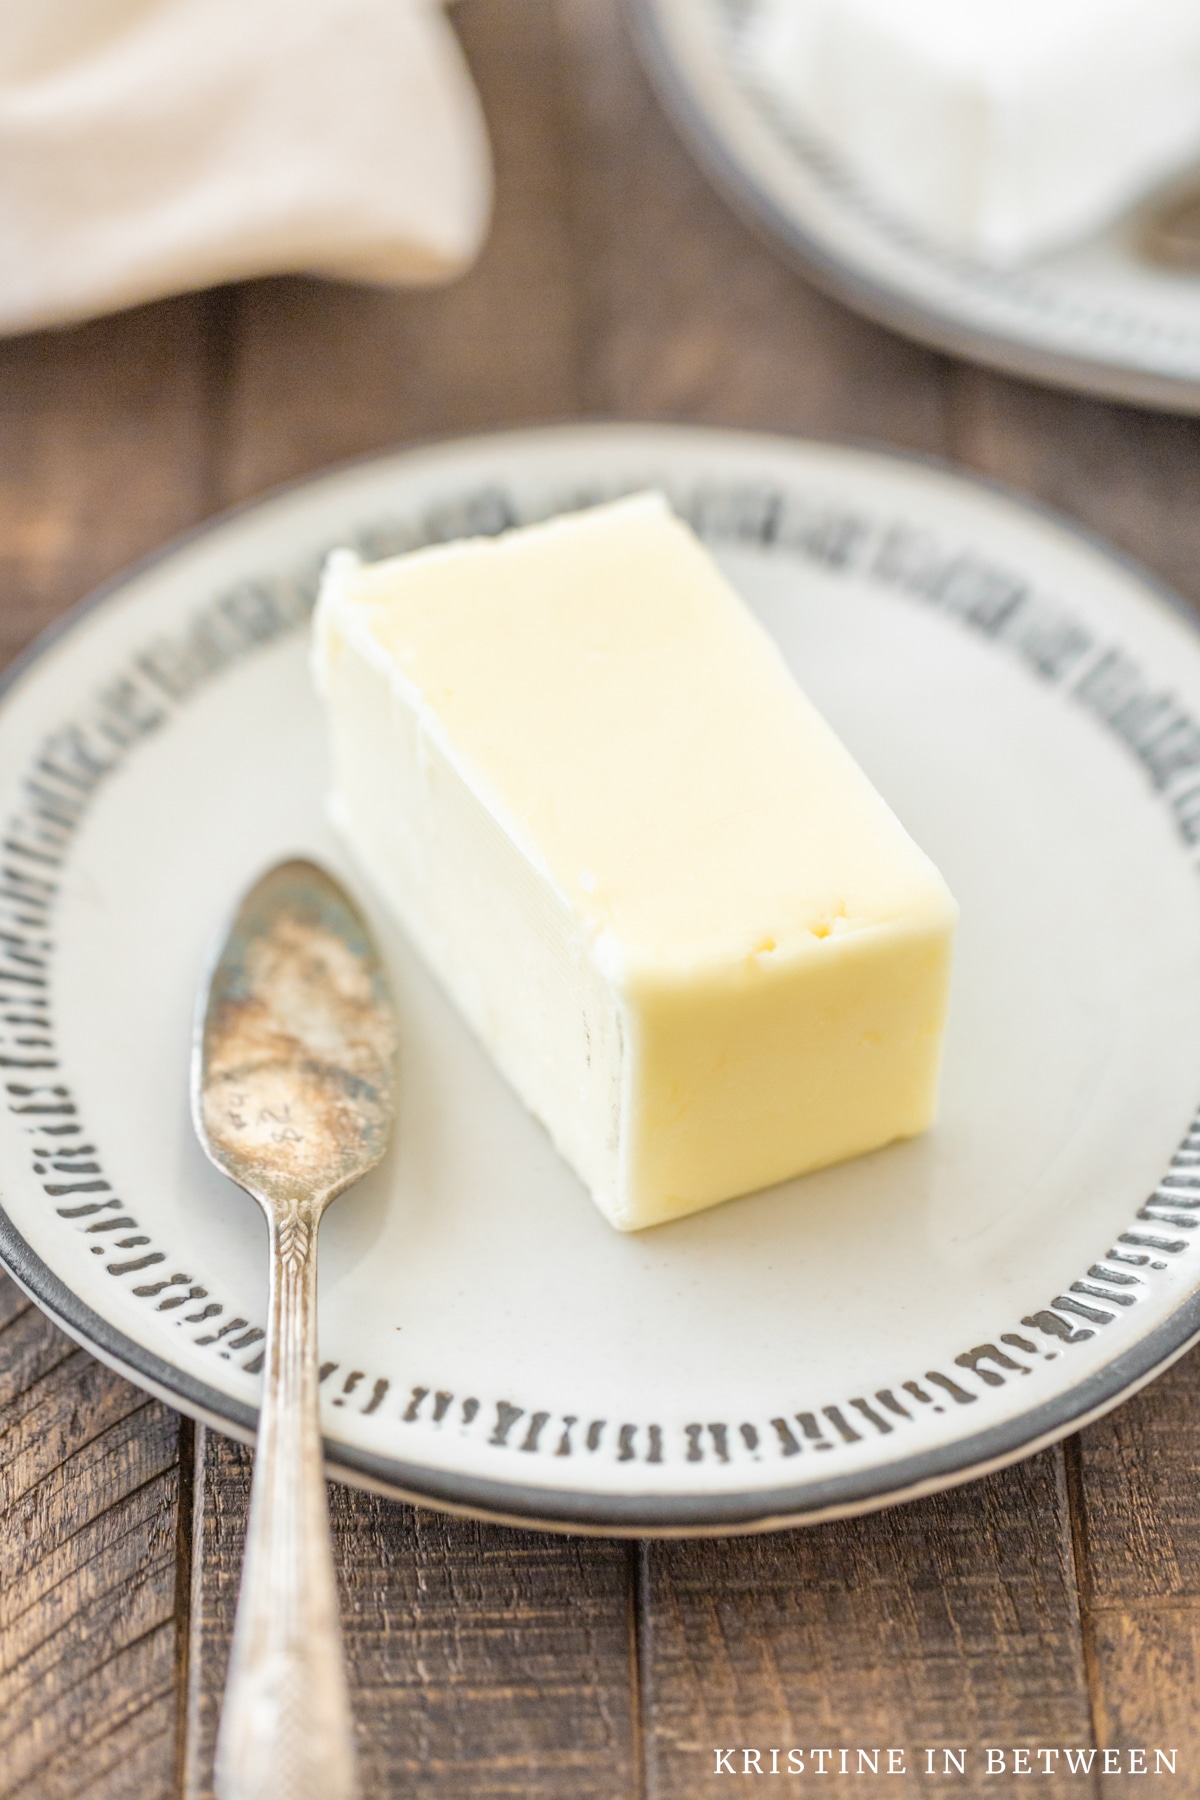 A plate of butter sitting with a butter knife.